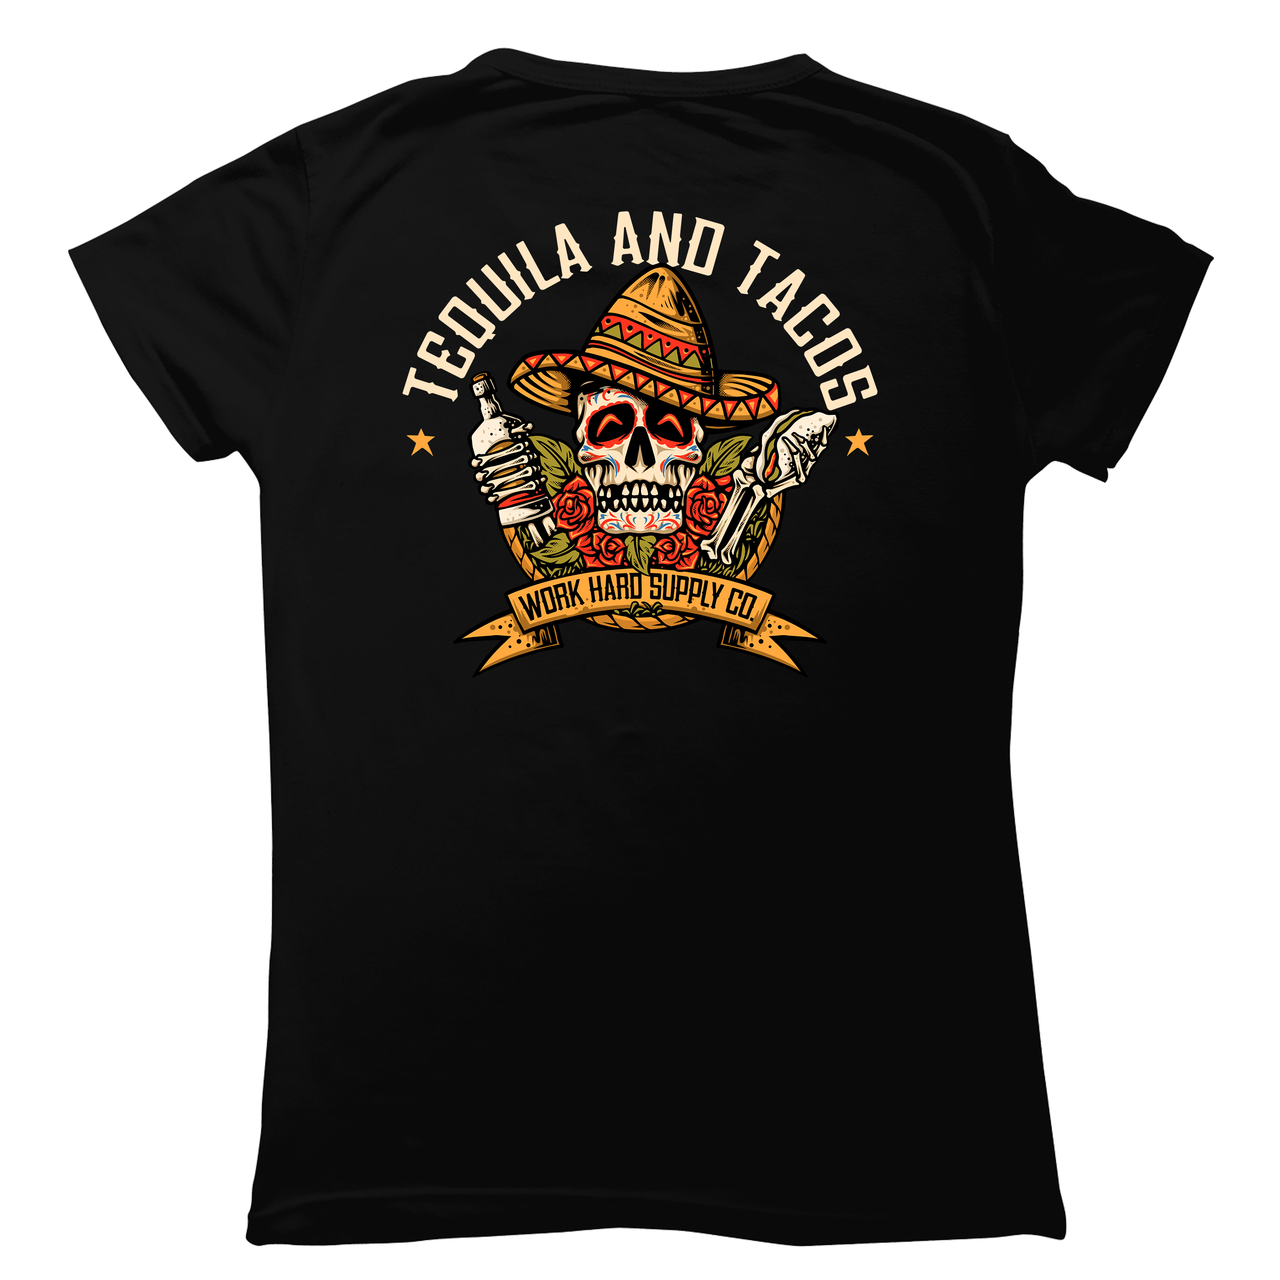 Tequila and Tacos-Work Hard Supply Co. Womens Tee